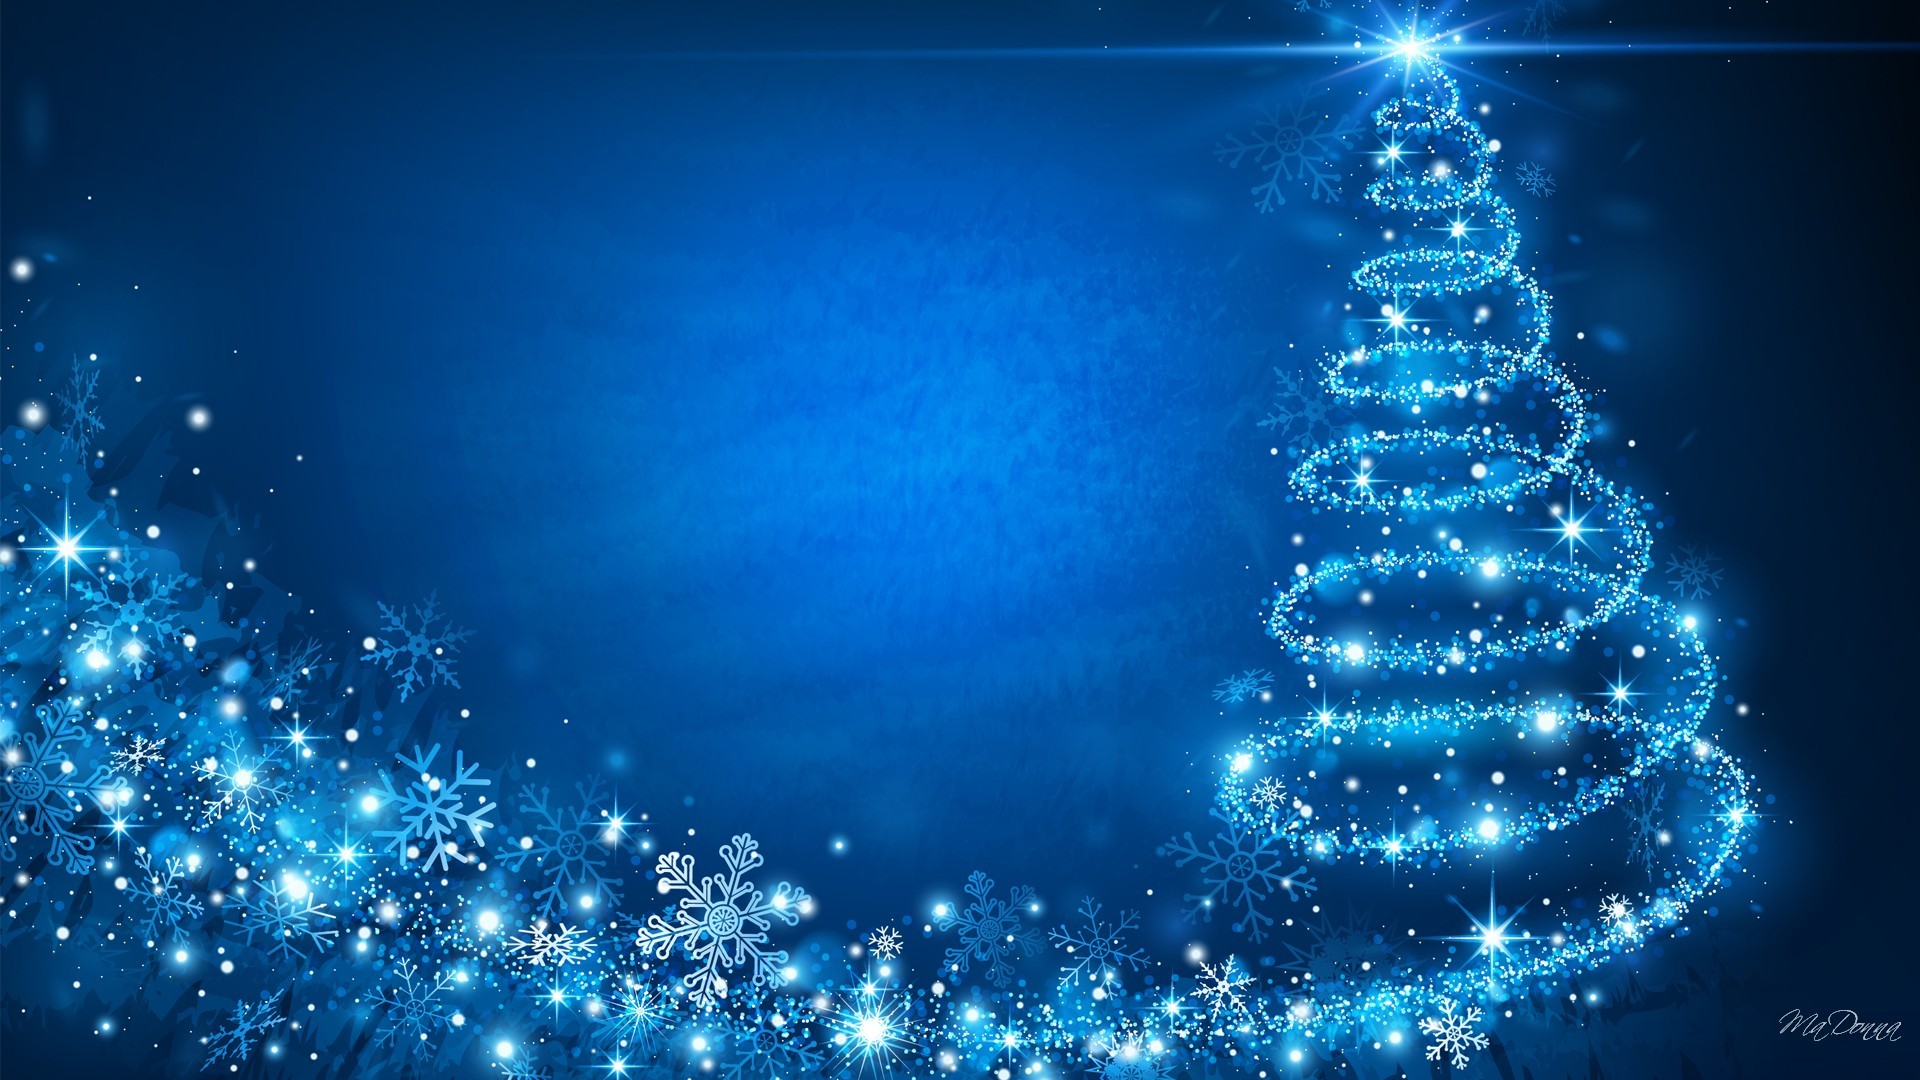 1920x1080 Blue Christmas Background Wallpaper Images #11755